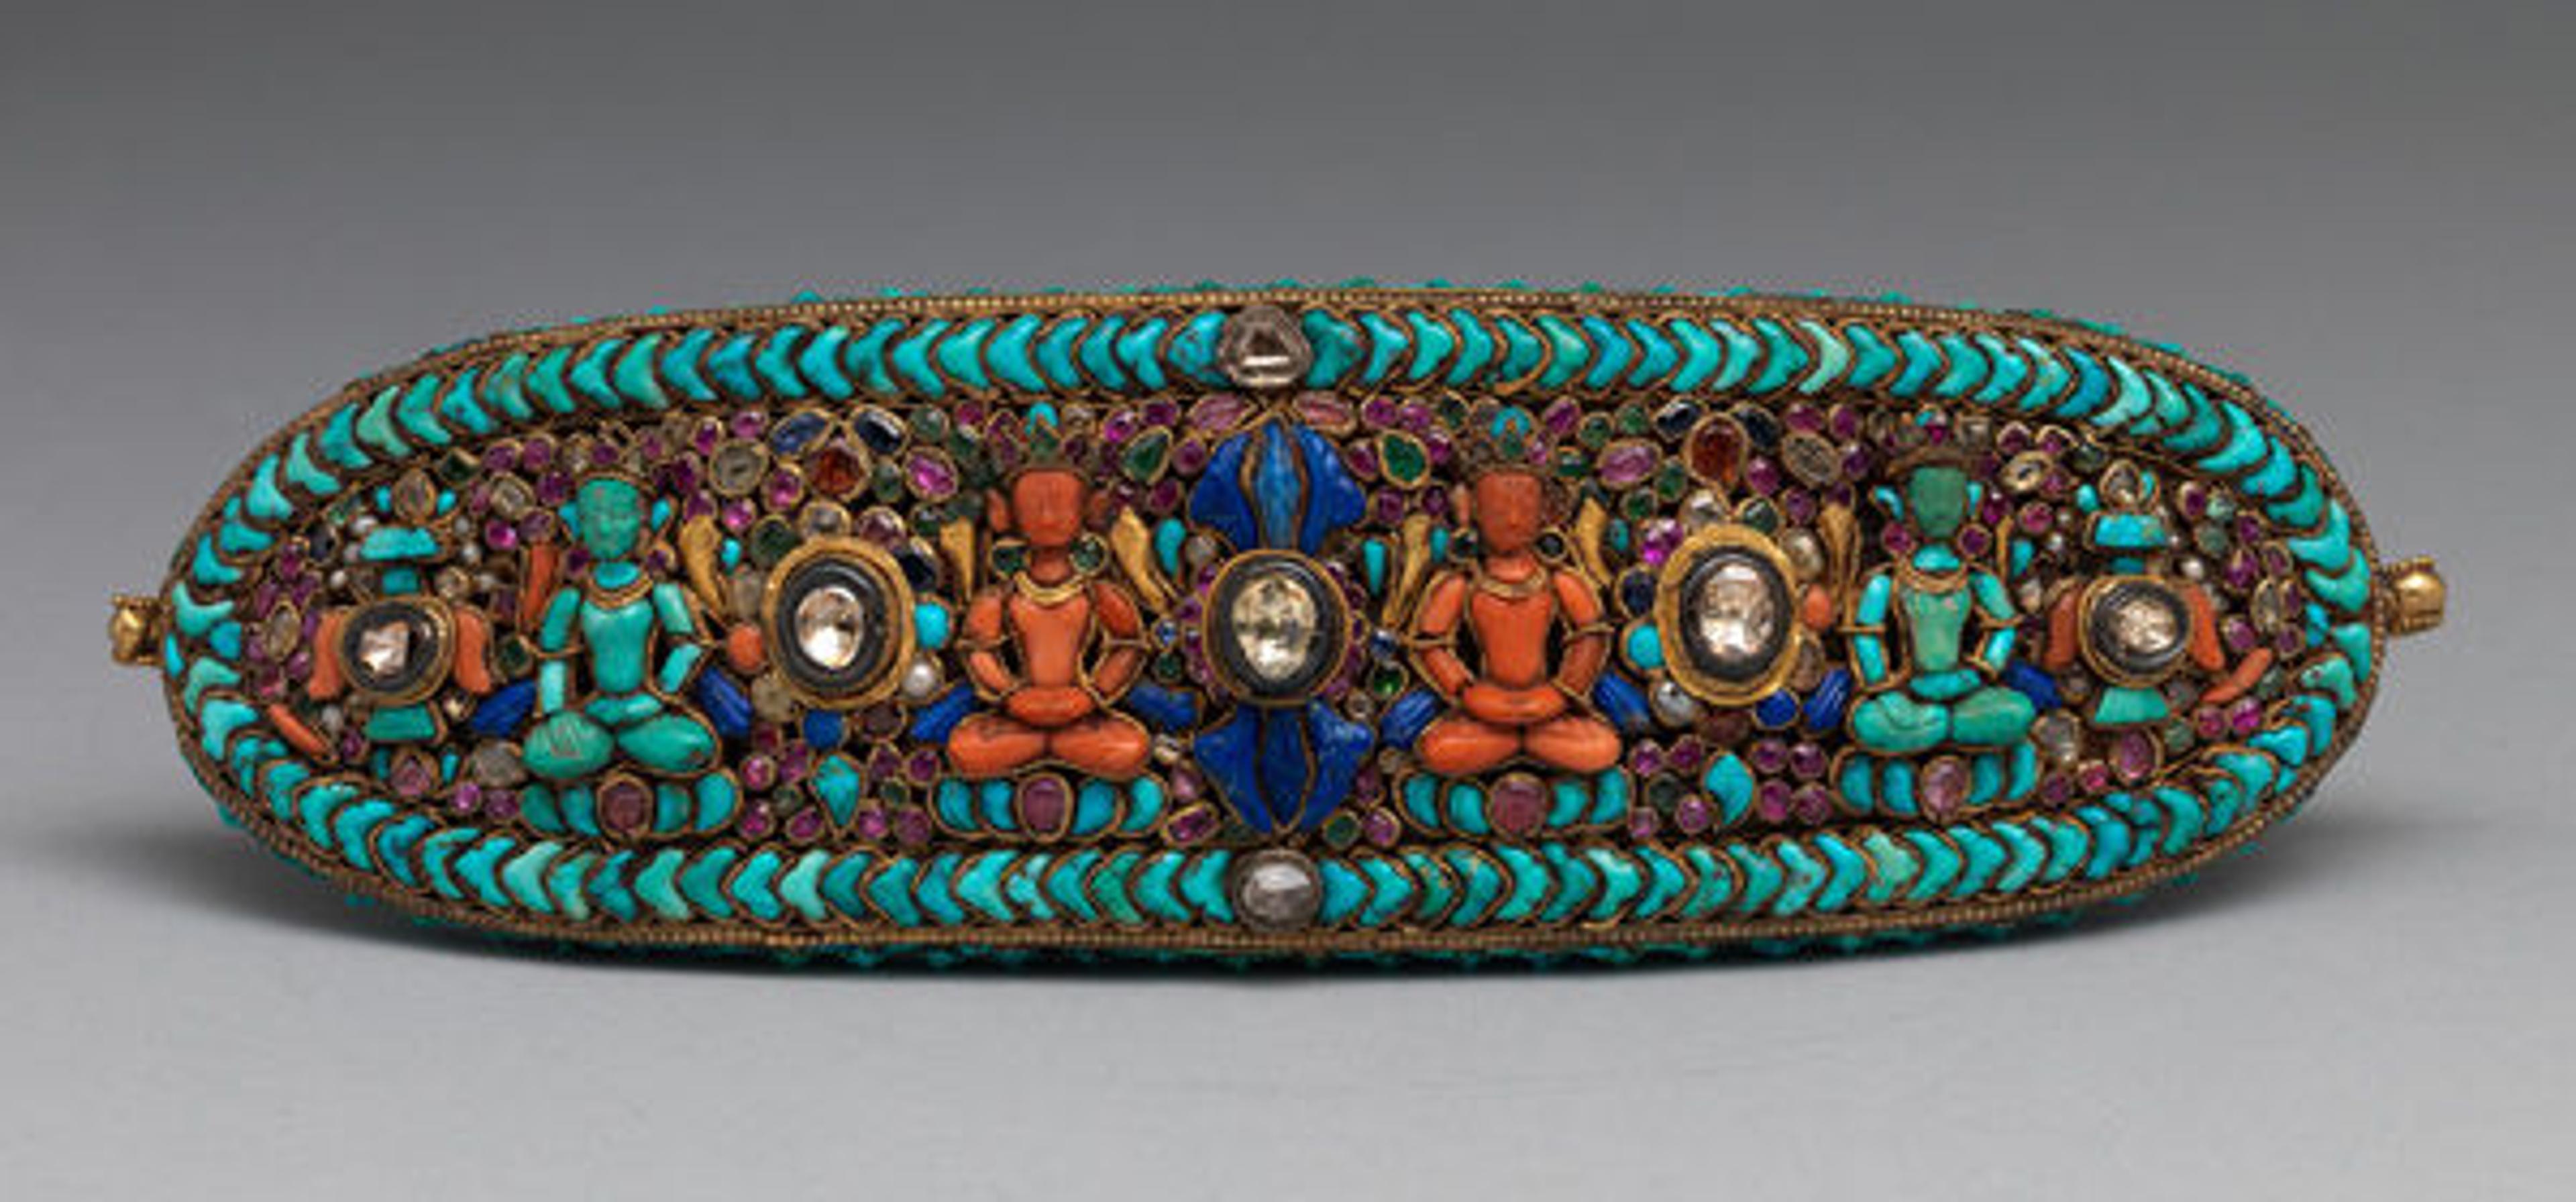 Forehead ornament for a deity, 17th–19th century. Newari for Nepal or Tibet market. Gold, diamonds, rubies, emeralds, sapphires, lapis lazuli, coral, shell and turquoise; 2 3/4 x 8 1/2 in. (7 x 21.6 cm). The Metropolitan Museum of Art, New York, John Stewart Kennedy Fund, 1915 (15.95.161)